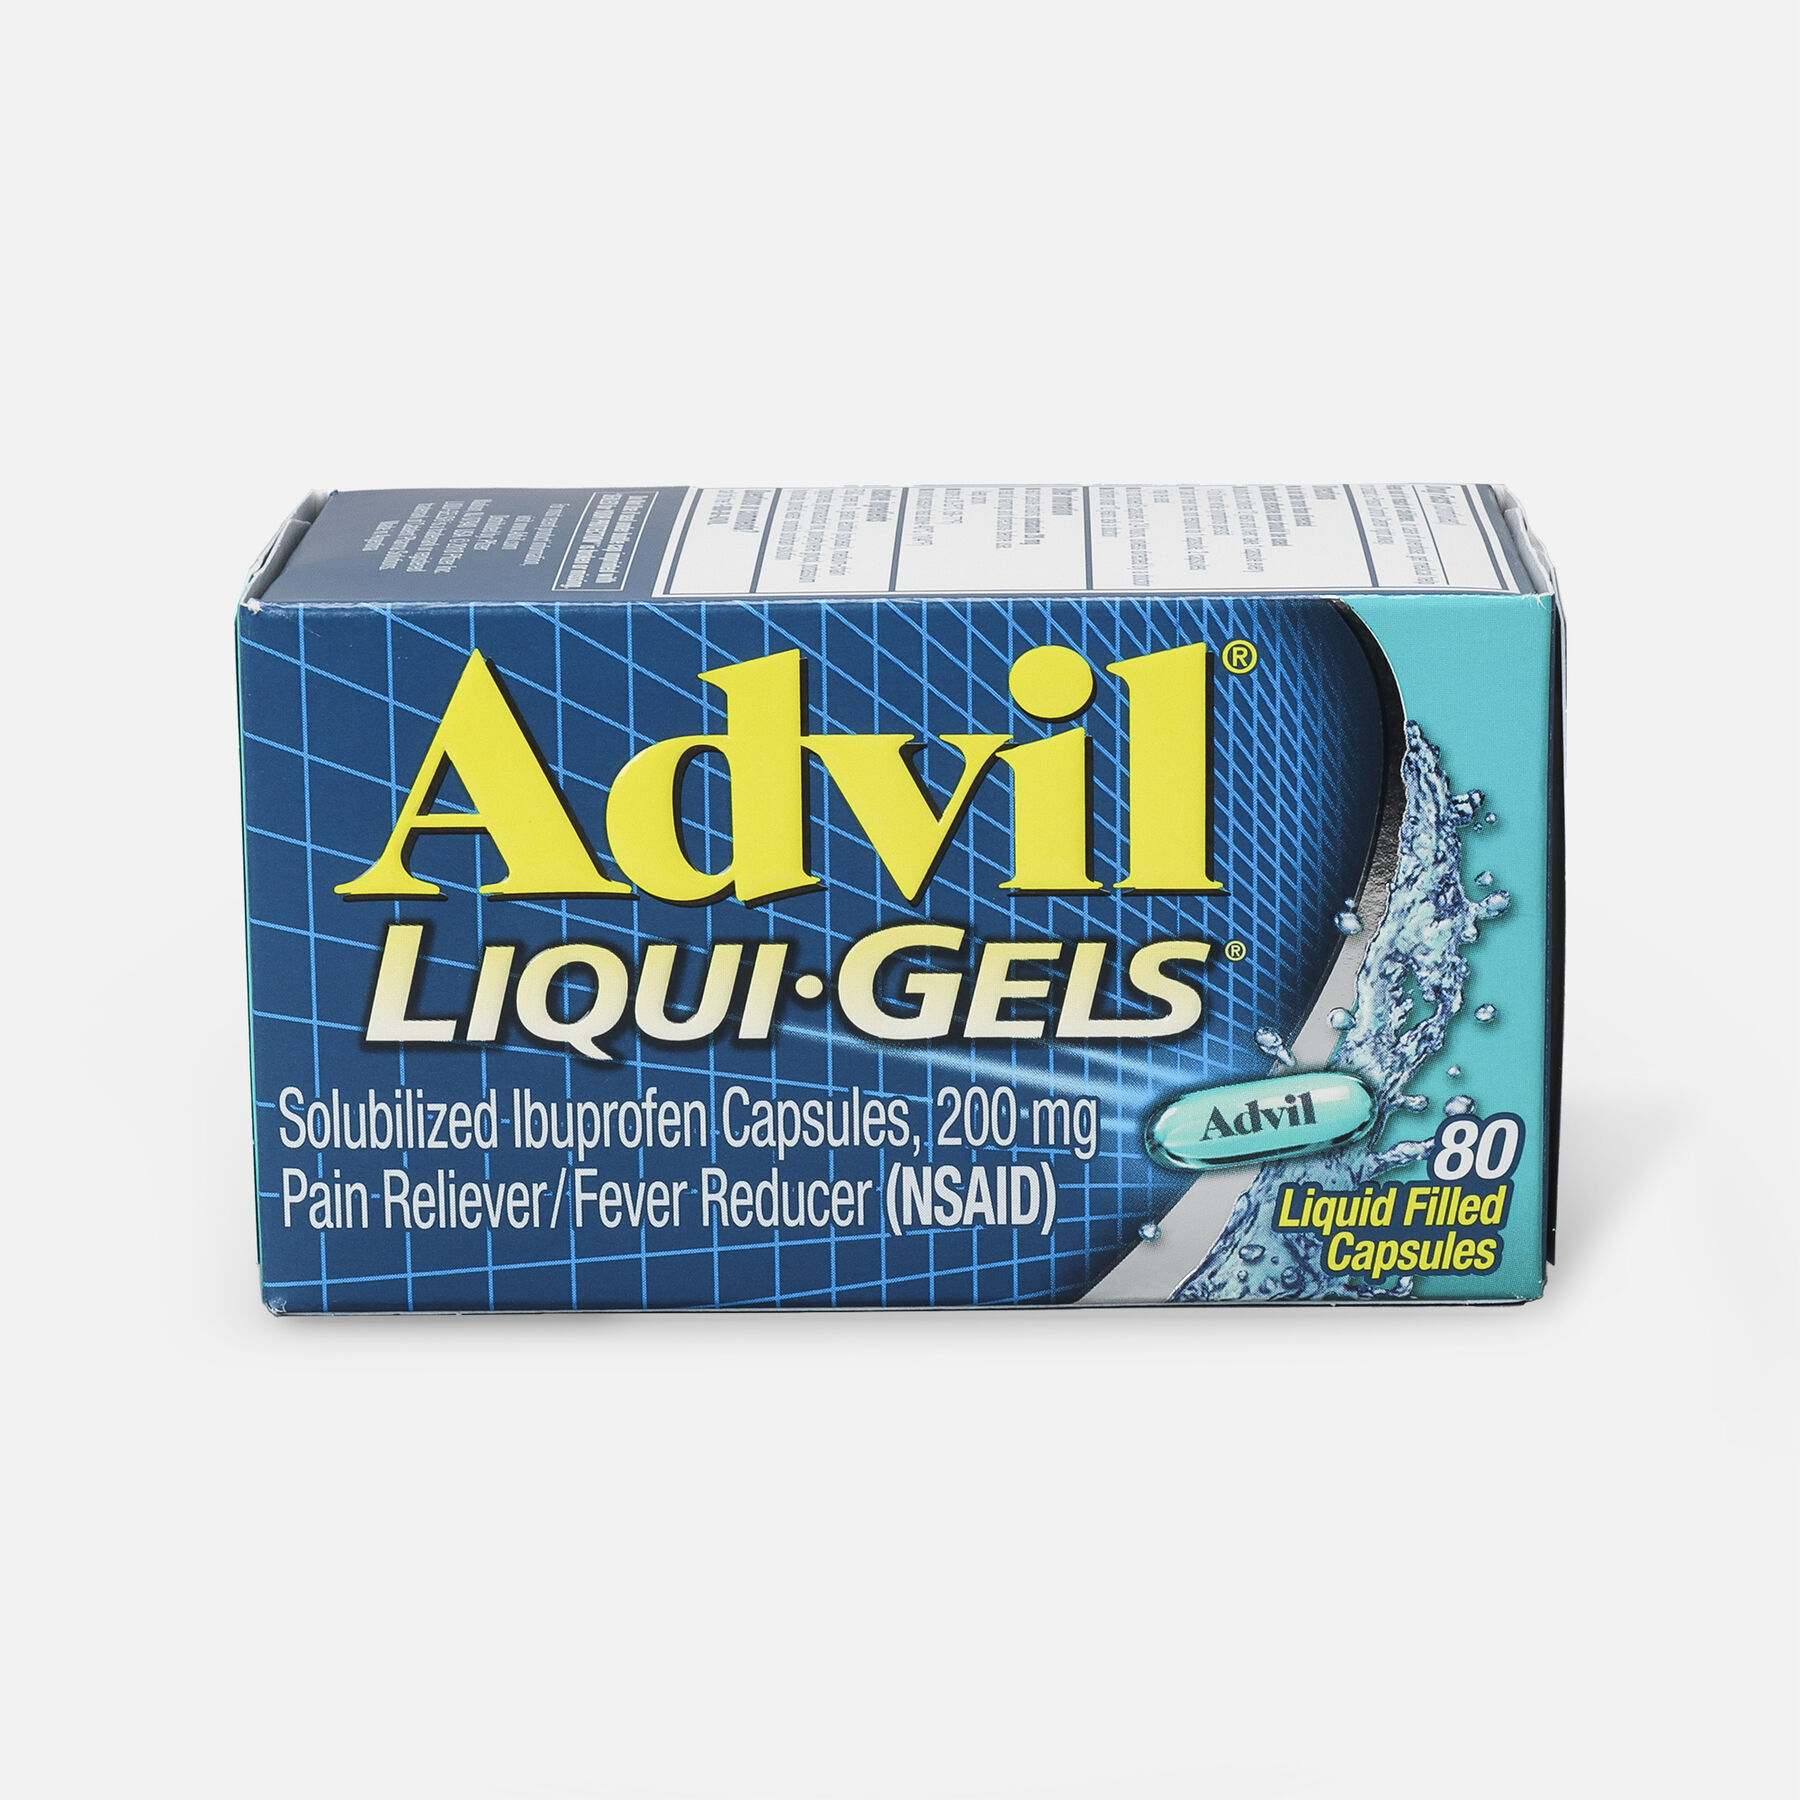 Advil Pain Reliever and Fever Reducer Liqui-Gels, 200mg